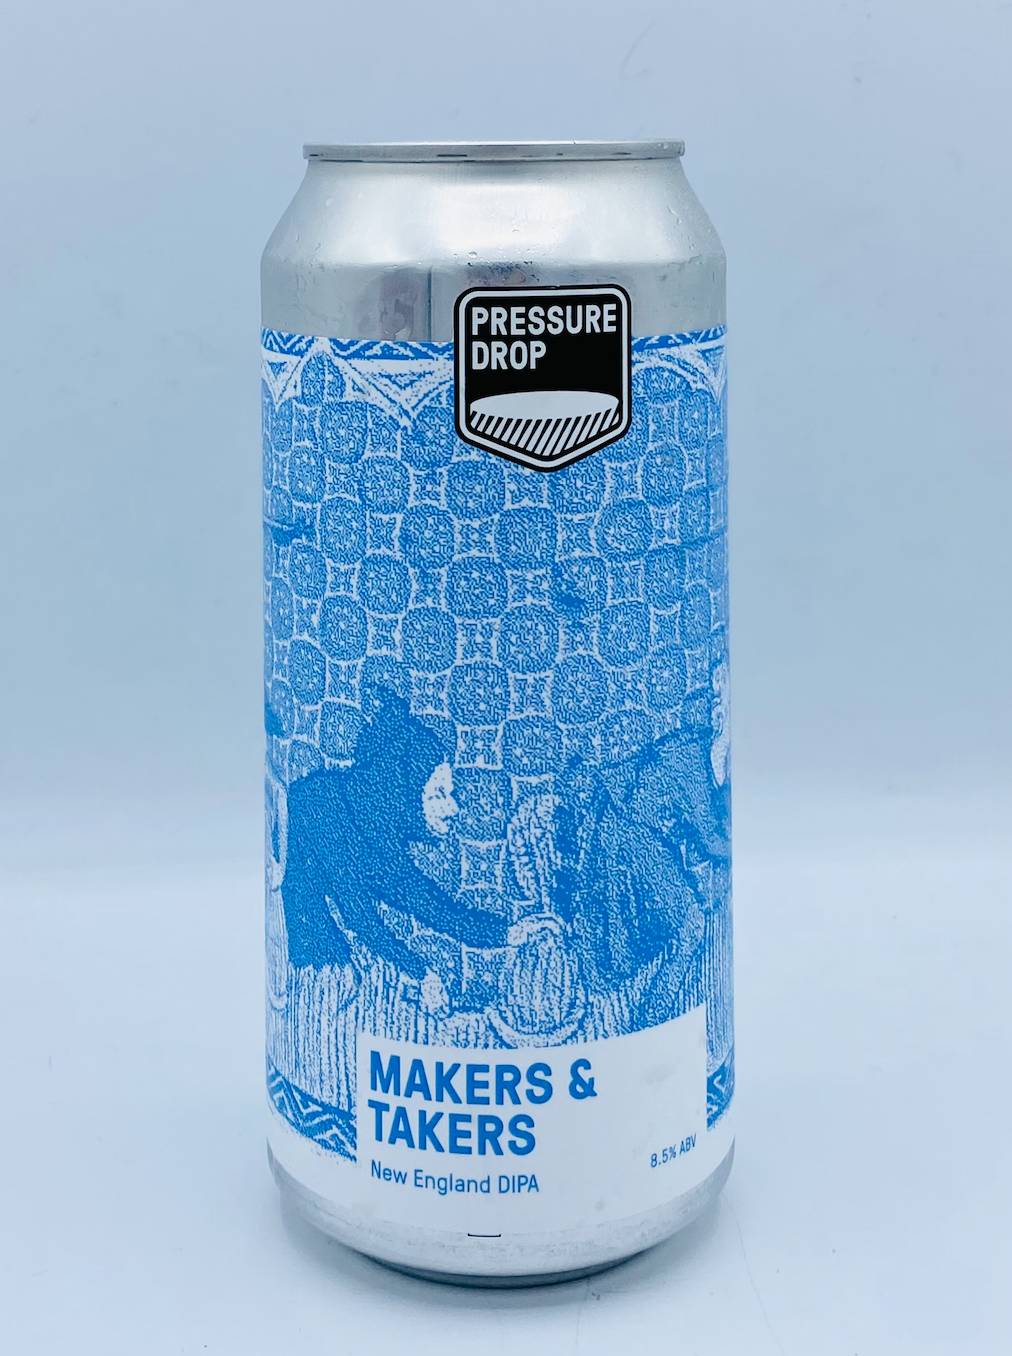 Pressure drop - Makers and Takers 8.5%